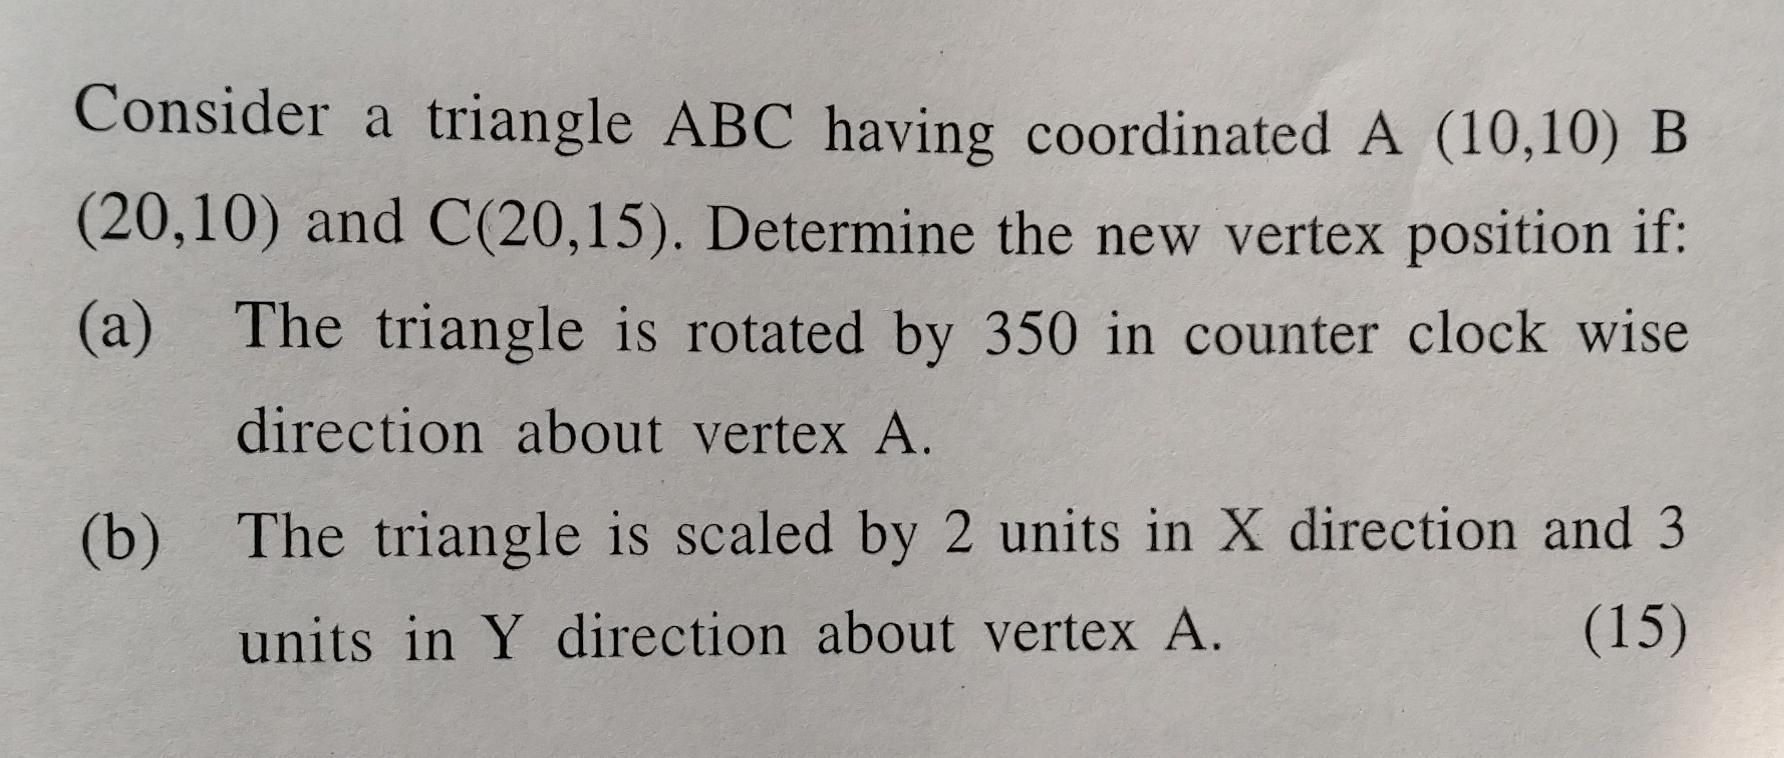 Consider a triangle ABC having coordinated A (10,10) B (20,10) and C(20,15). Determine the new vertex